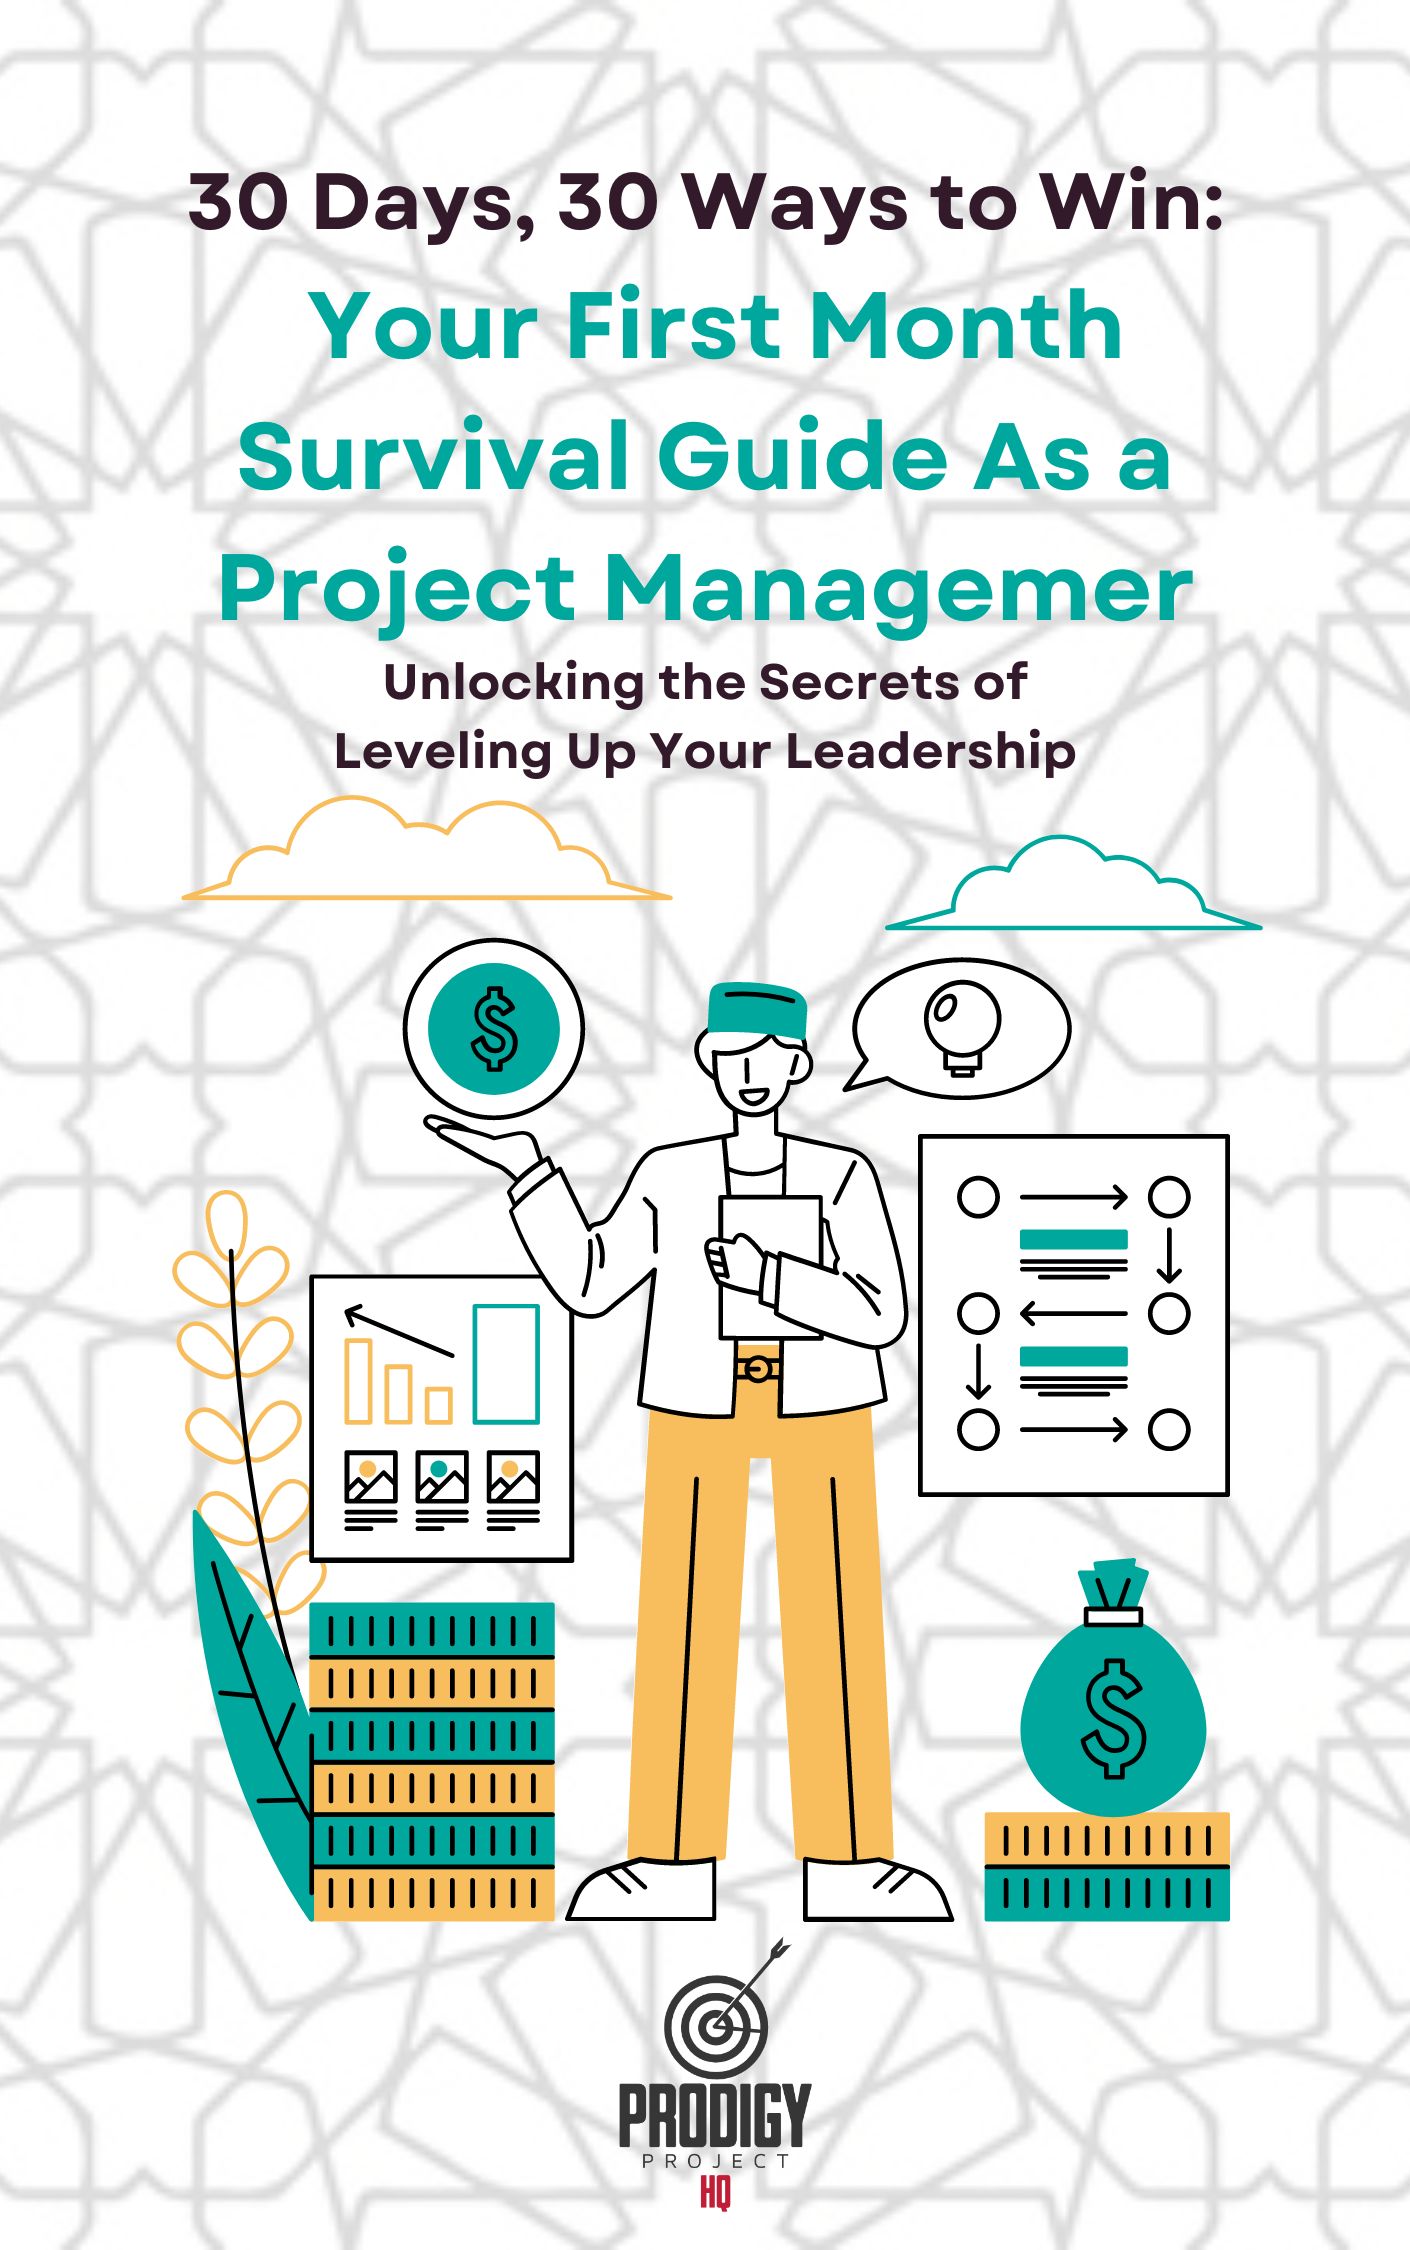 30 Days, 30 Ways to Win Your Project Management Survival Guide